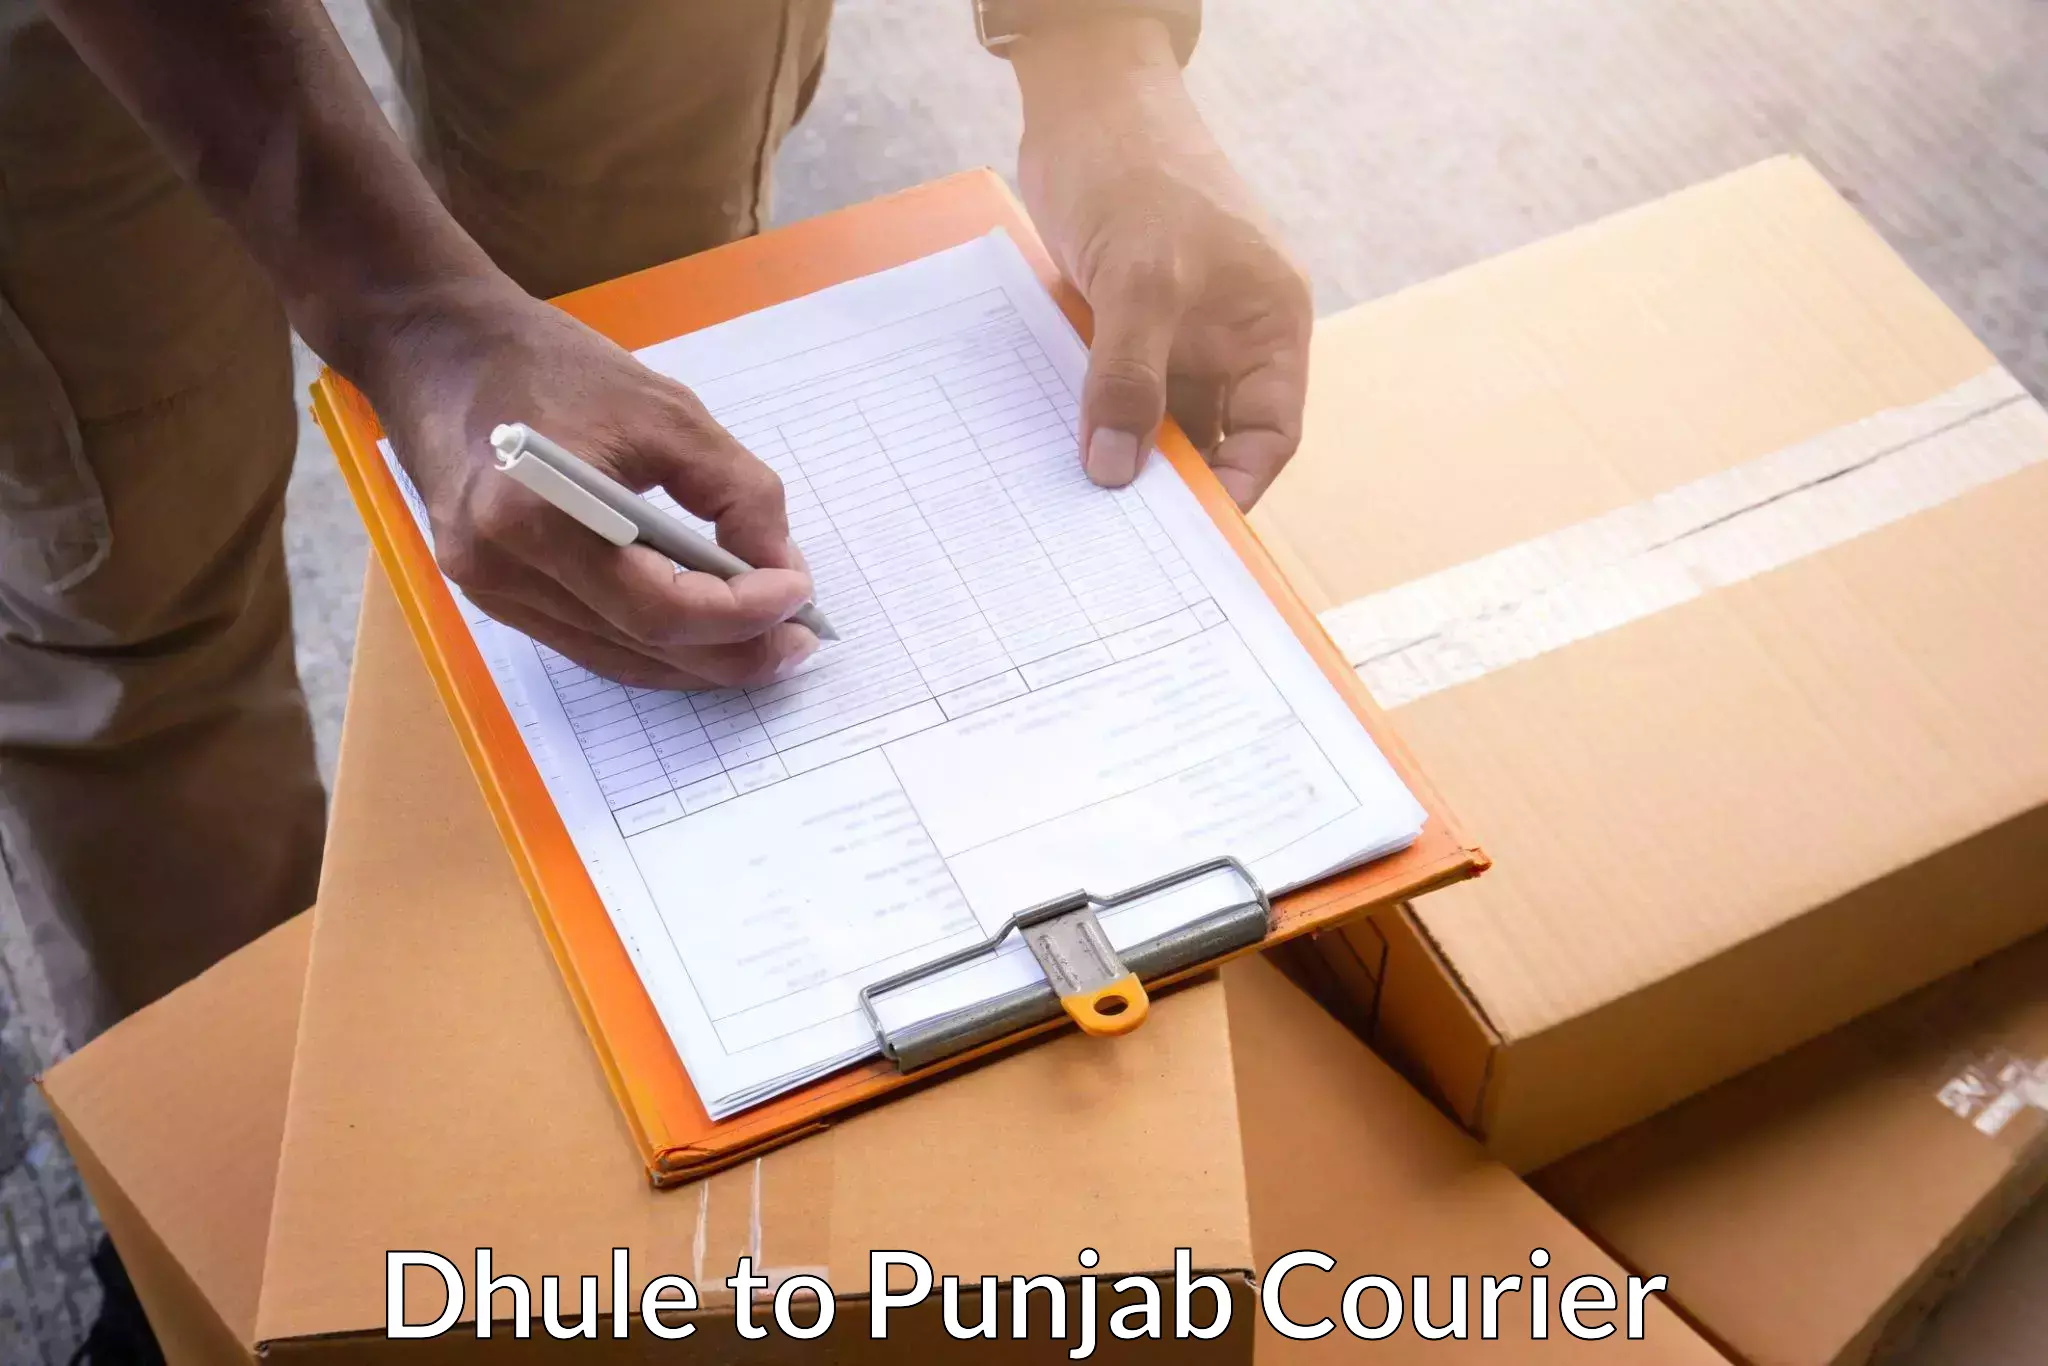 Nationwide parcel services Dhule to Punjab